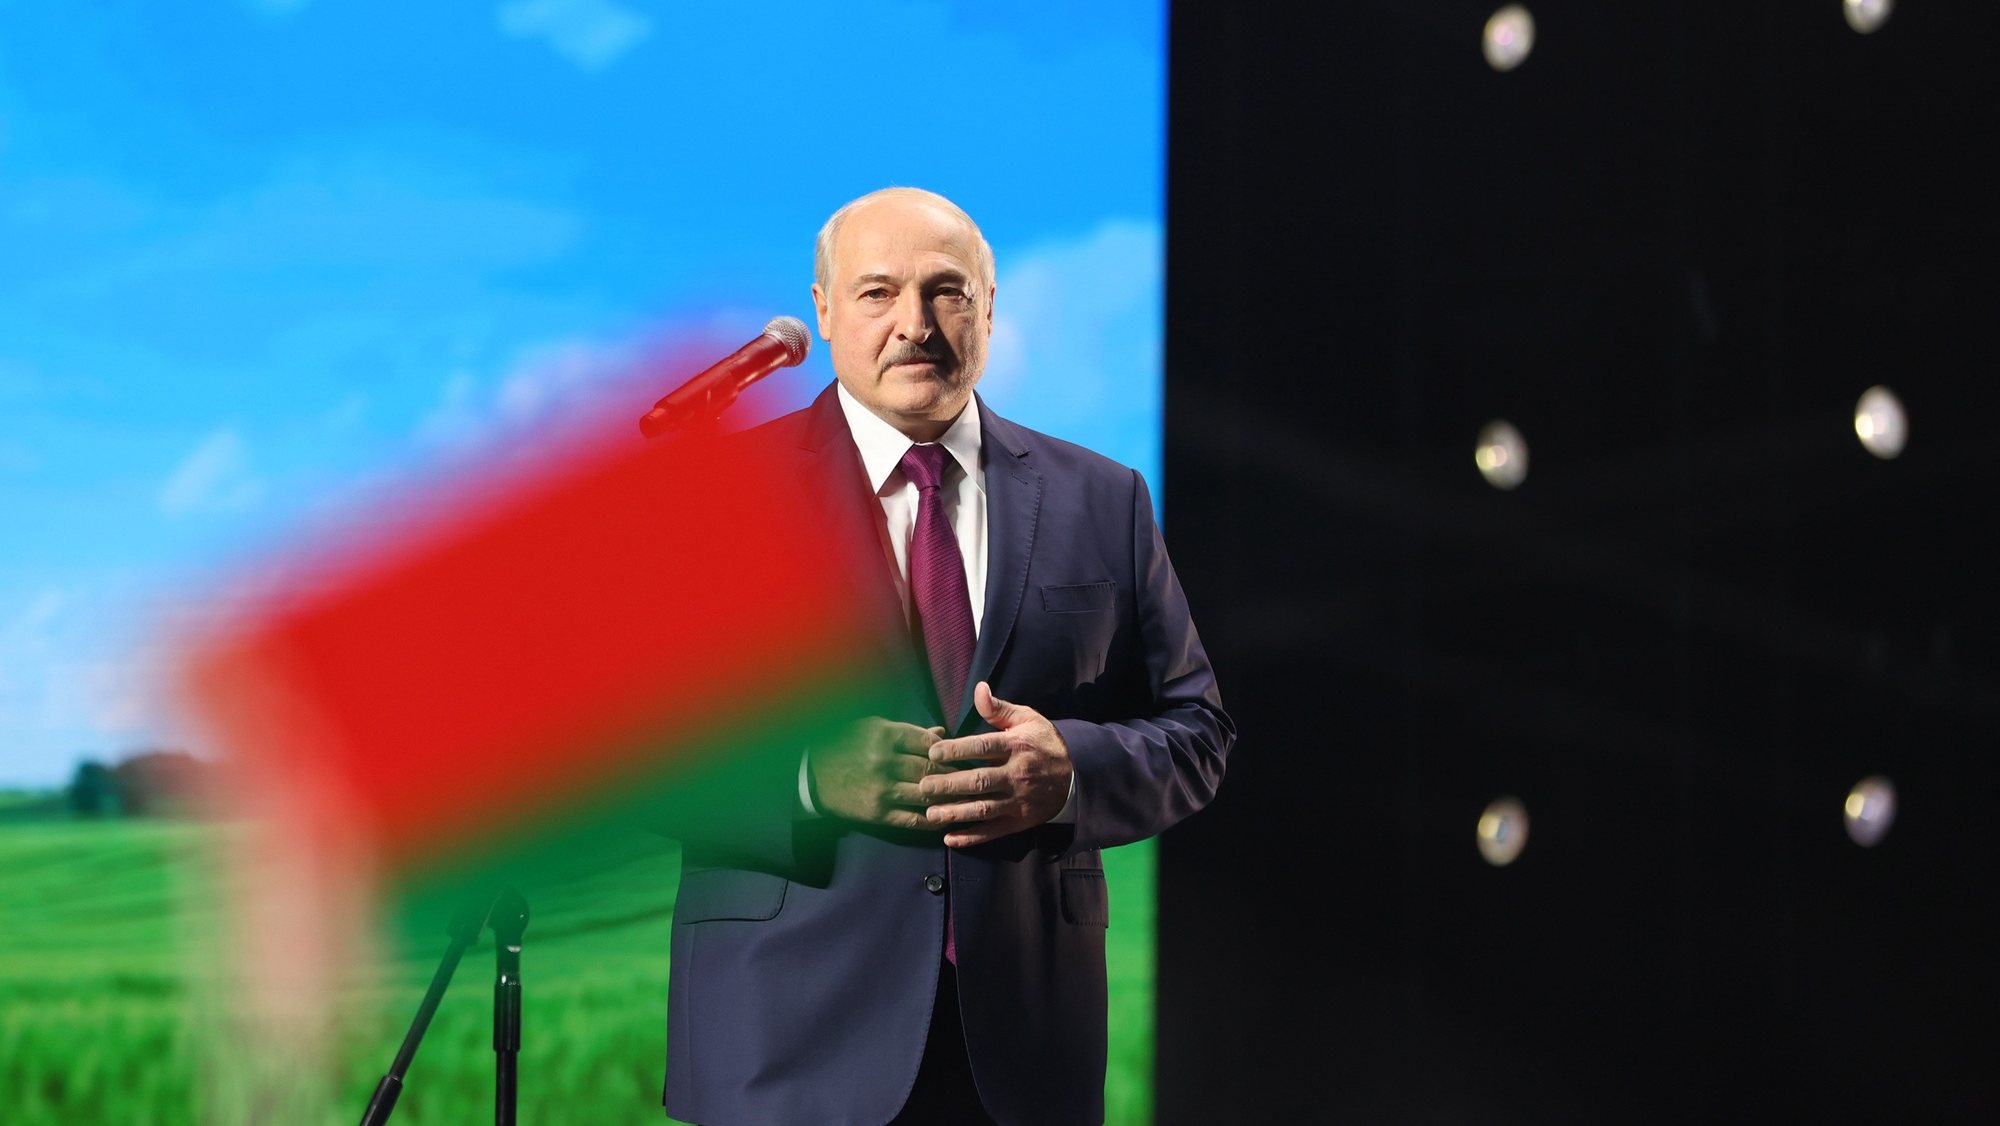 epa08677895 Belarus President Alexander Lukashenko (C) speaks during the forum of Union of Women in Minsk, Belarus, 17 September 2020 (issued 18 September 2020). According to reports, Belarusian President Alexander Lukashenko announced on 17 September 2020, closing Belarusian borders with Poland and Lithuania, after he said that ongoing opposition protest are led by Western countries, European Union and United States.  EPA/ANDREI STASEVICH / BELTA POOL MANDATORY CREDIT